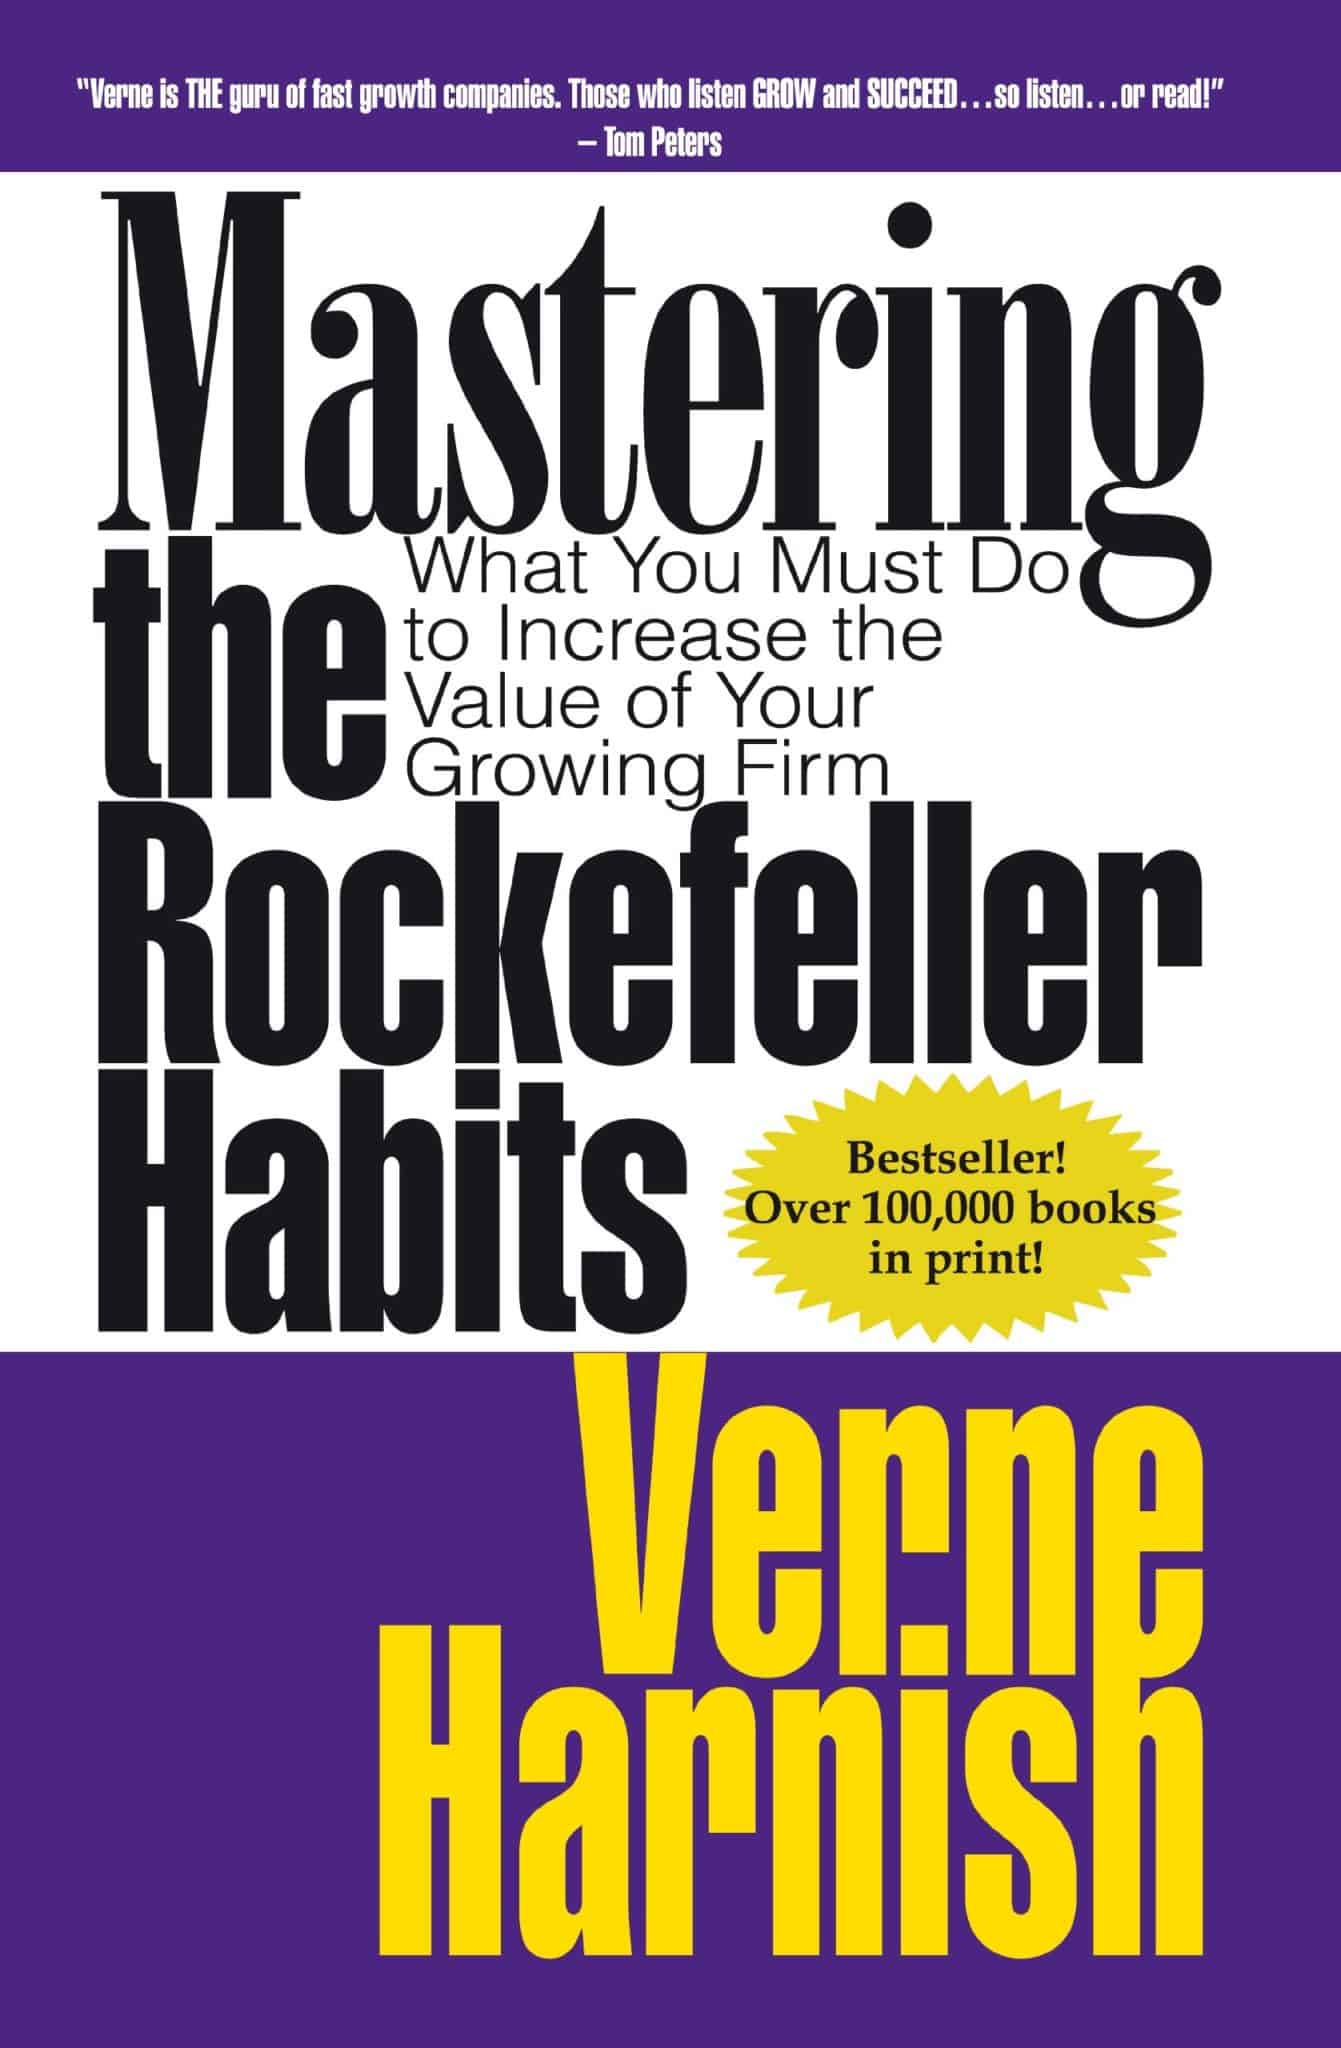 Mastering the Rockefeller Habits – Advice for increasing the value of your IT business image